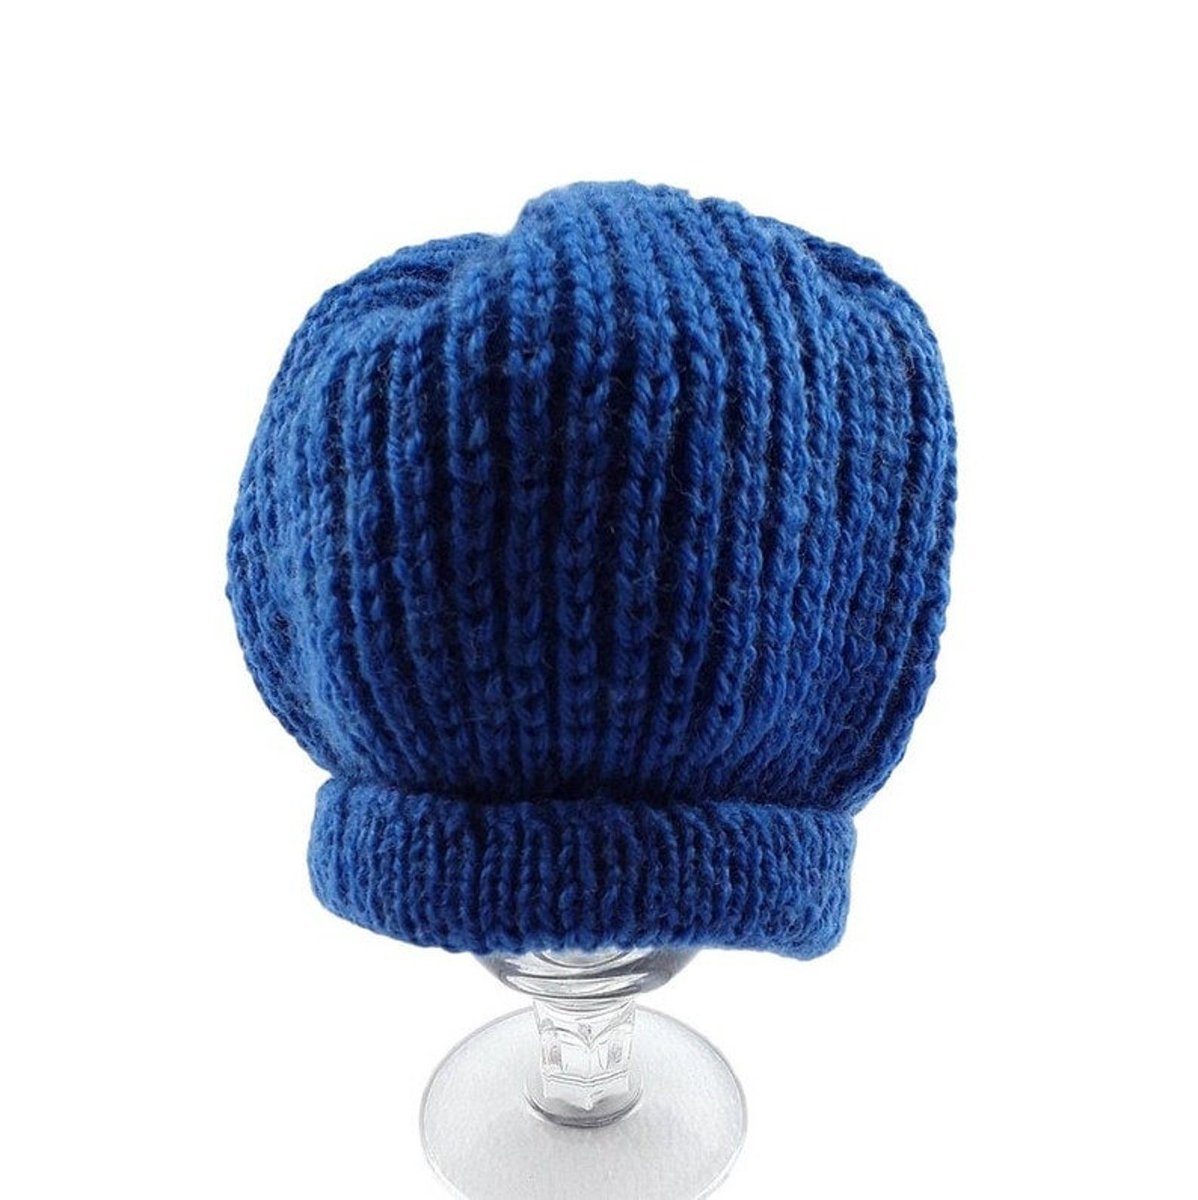 #MHHSBD 

𝗥𝗶𝗯𝗯𝗲𝗱 𝗯𝗮𝗯𝘆 𝗵𝗮𝘁 

Keep your little ones cozy and stylish with this hand-knitted ribbed baby hat in blue. Ideal for 6-12 months old. Shop now on Etsy from Knittingtopia. Support small businesses and treasure unique finds.

 knittingtopia.etsy.com/listing/167945…